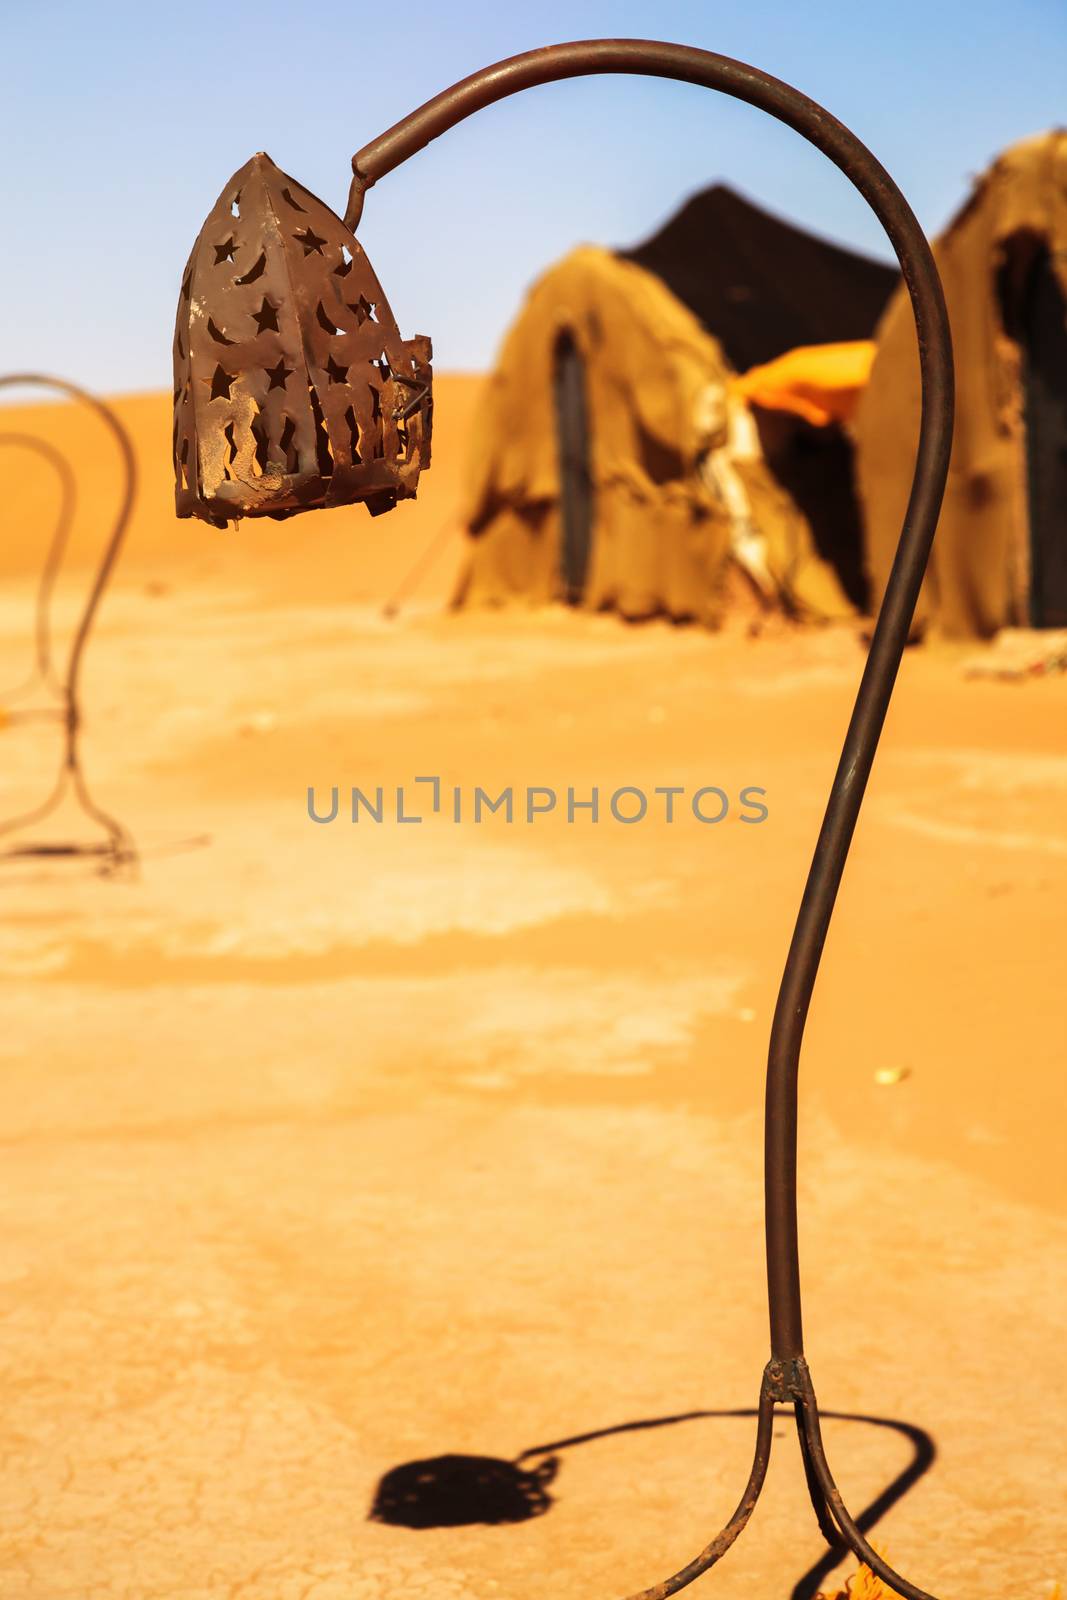 wrought iron berber lamp with traditional nomad tents on backgro by pixinoo